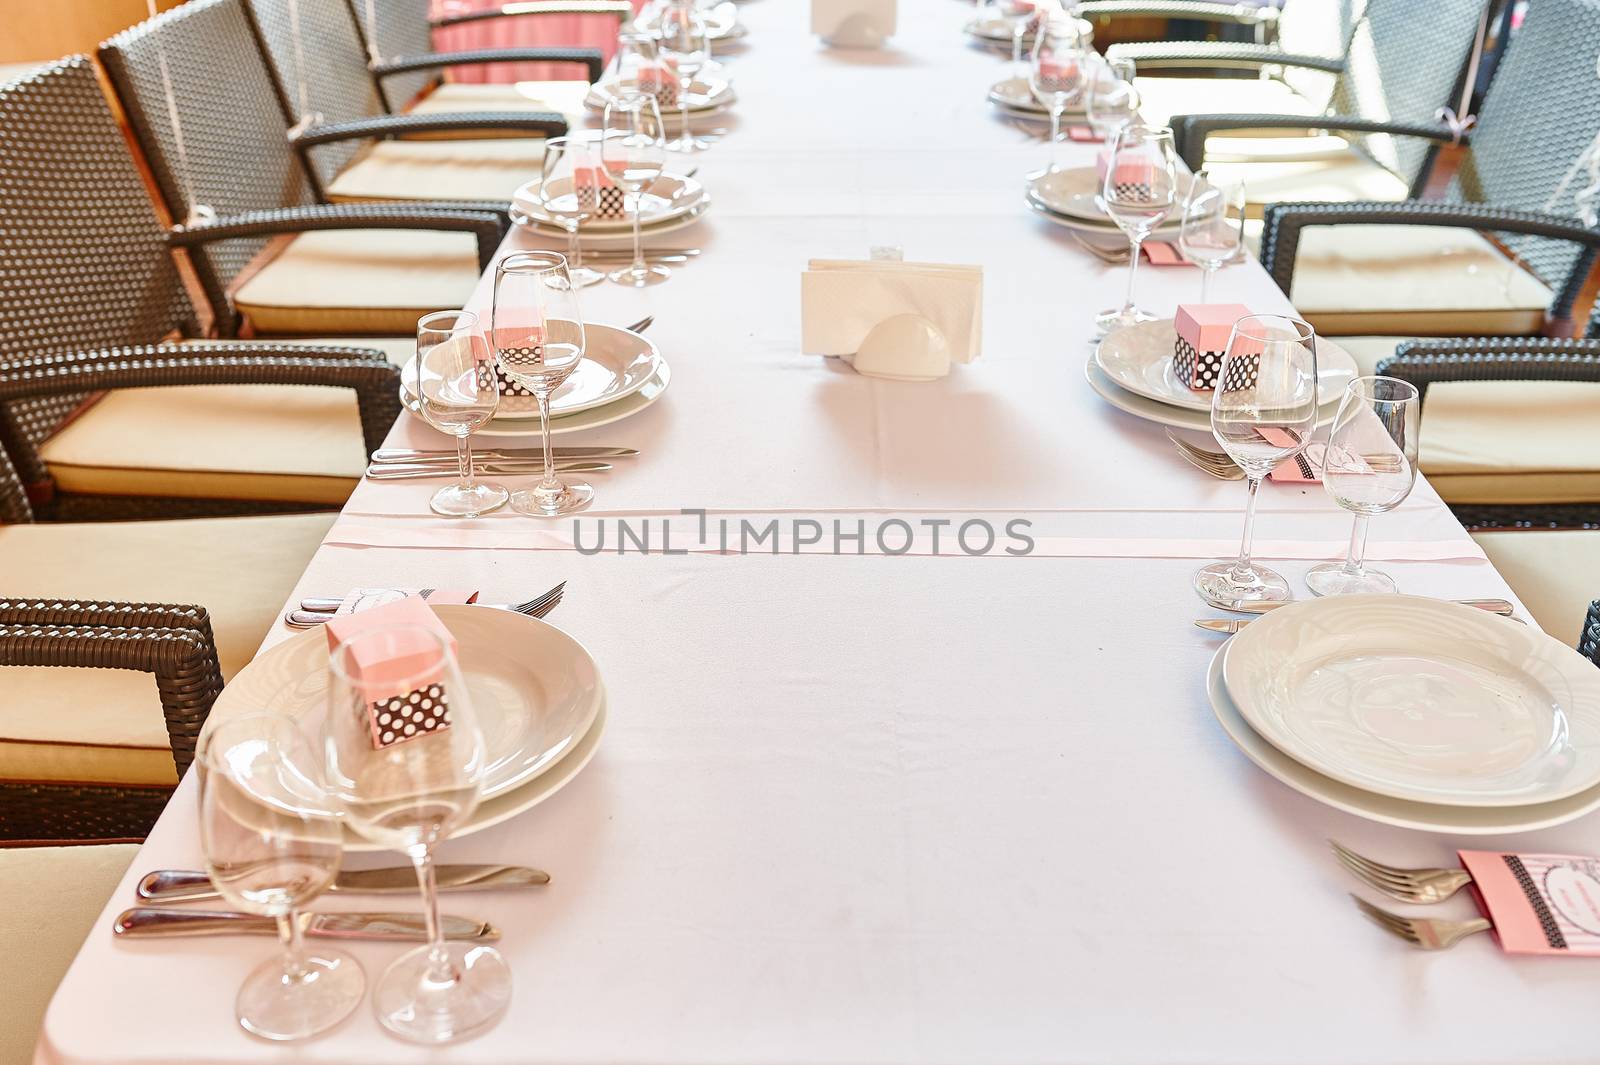 Serving table for a wedding banquet in a restaurant by timonko